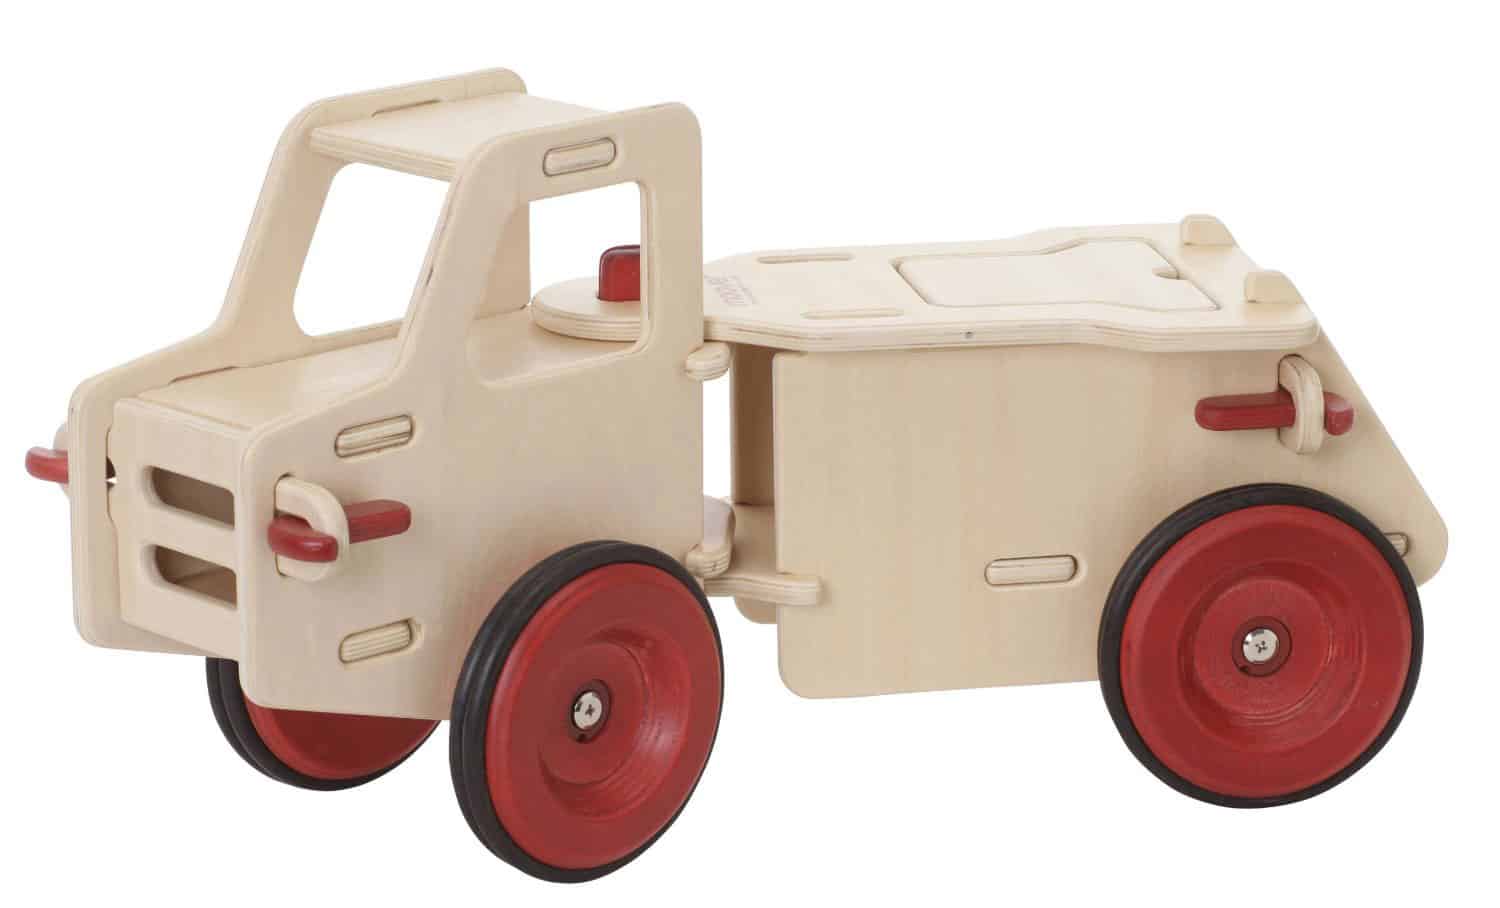 8 STARTER WOODEN RIDE-ON TOYS FOR TODDLERS